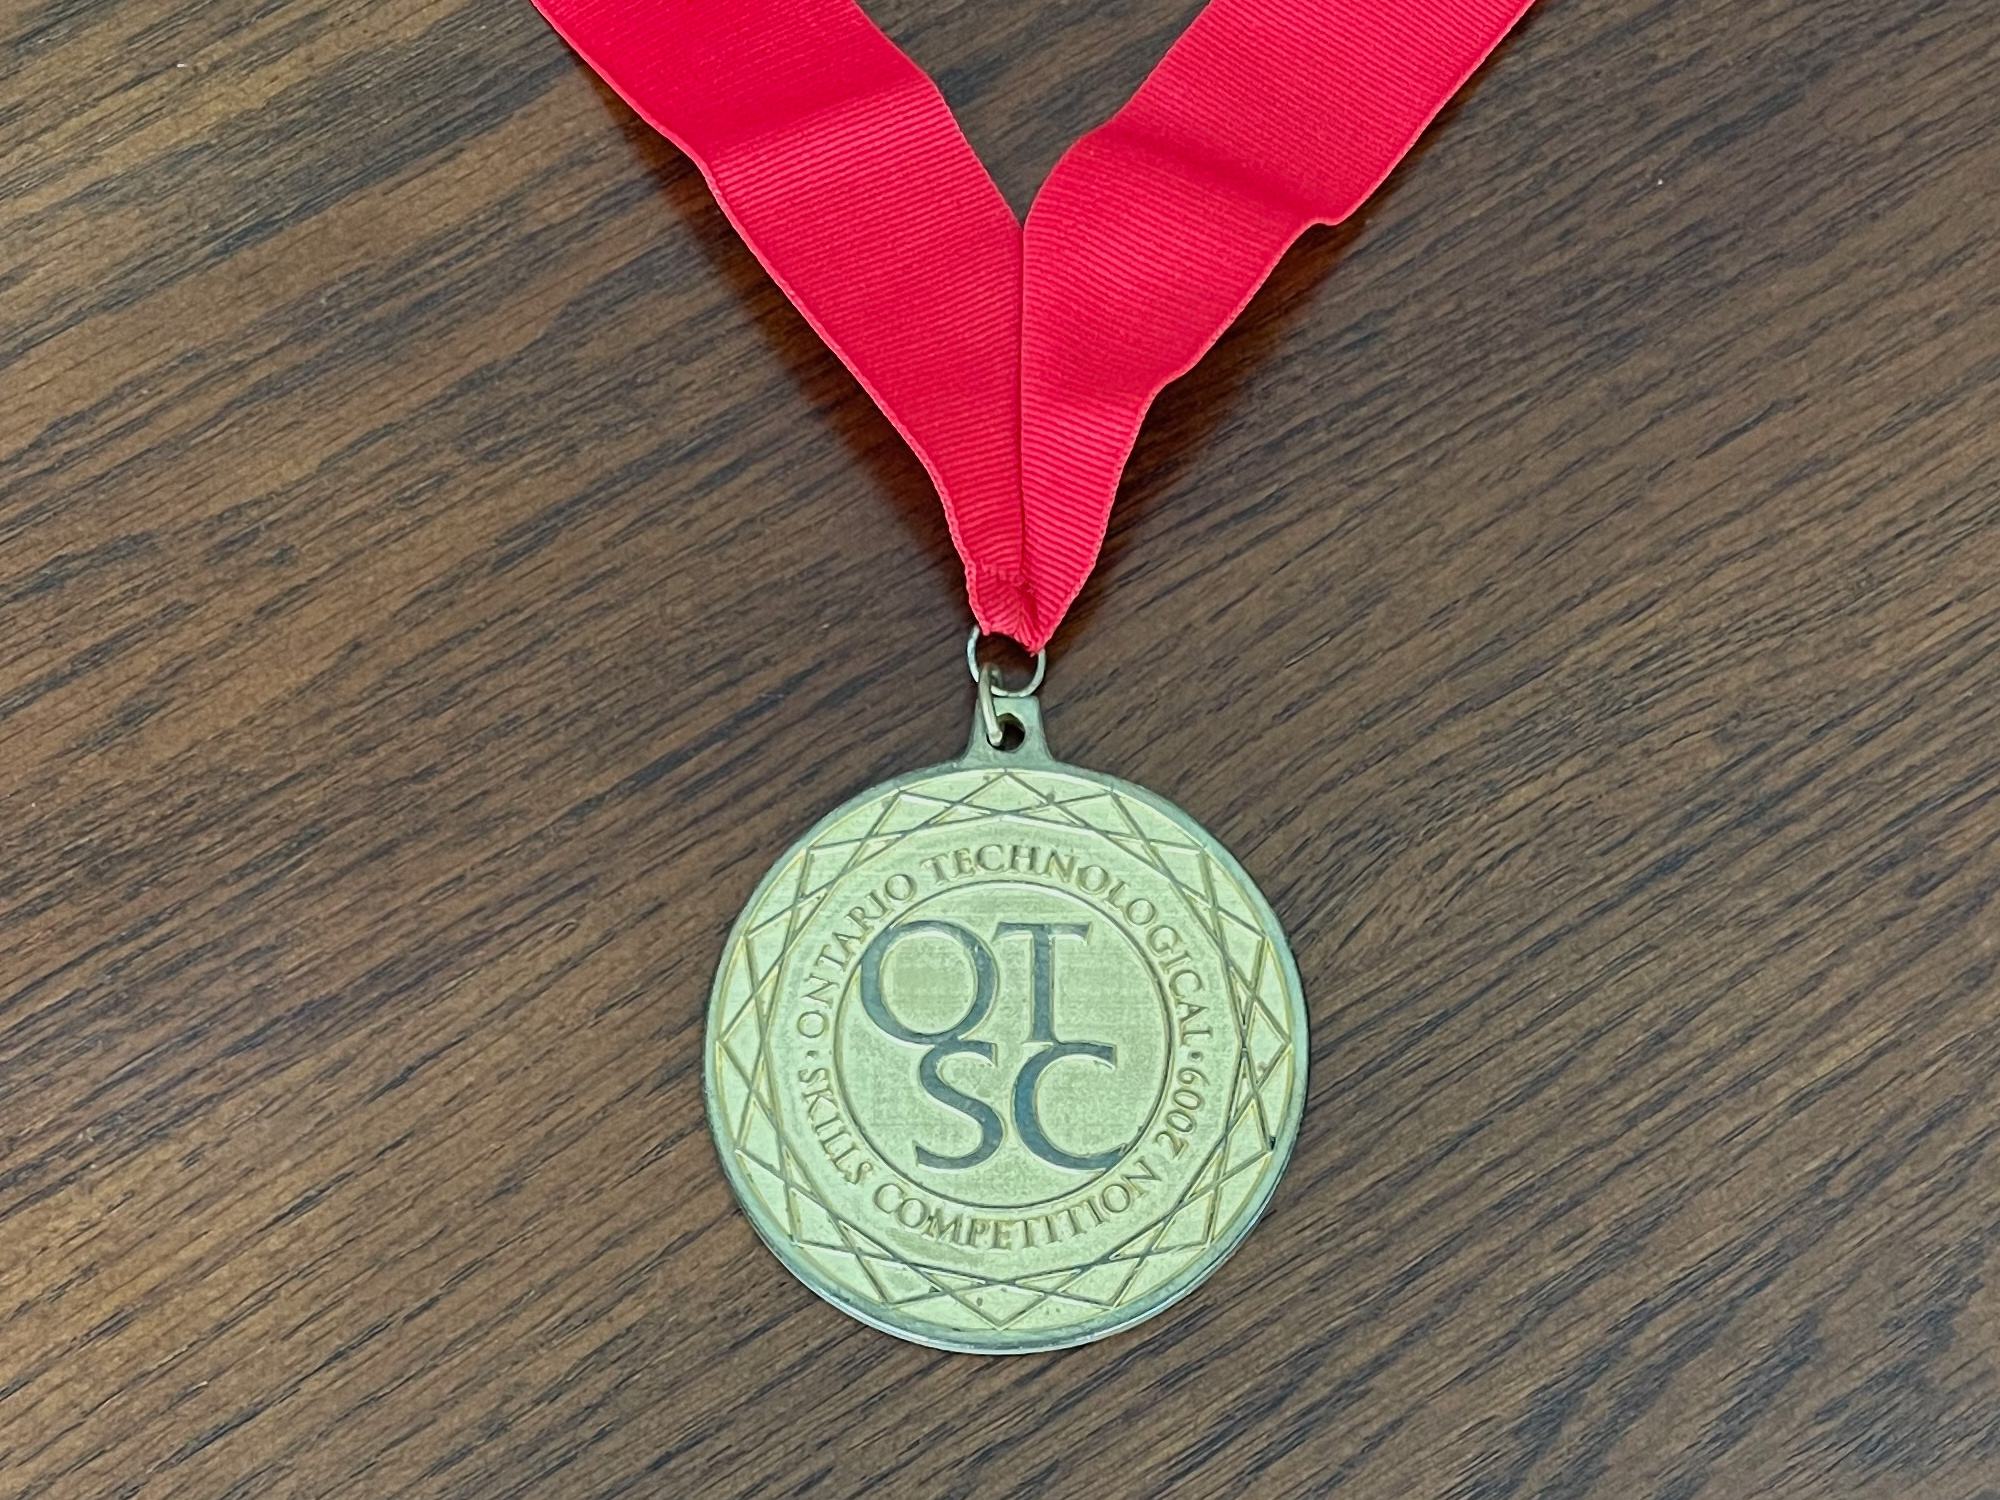 Skills Ontario 2009 Gold Medal. OTSC stands for Ontario Technical Skills Competition.